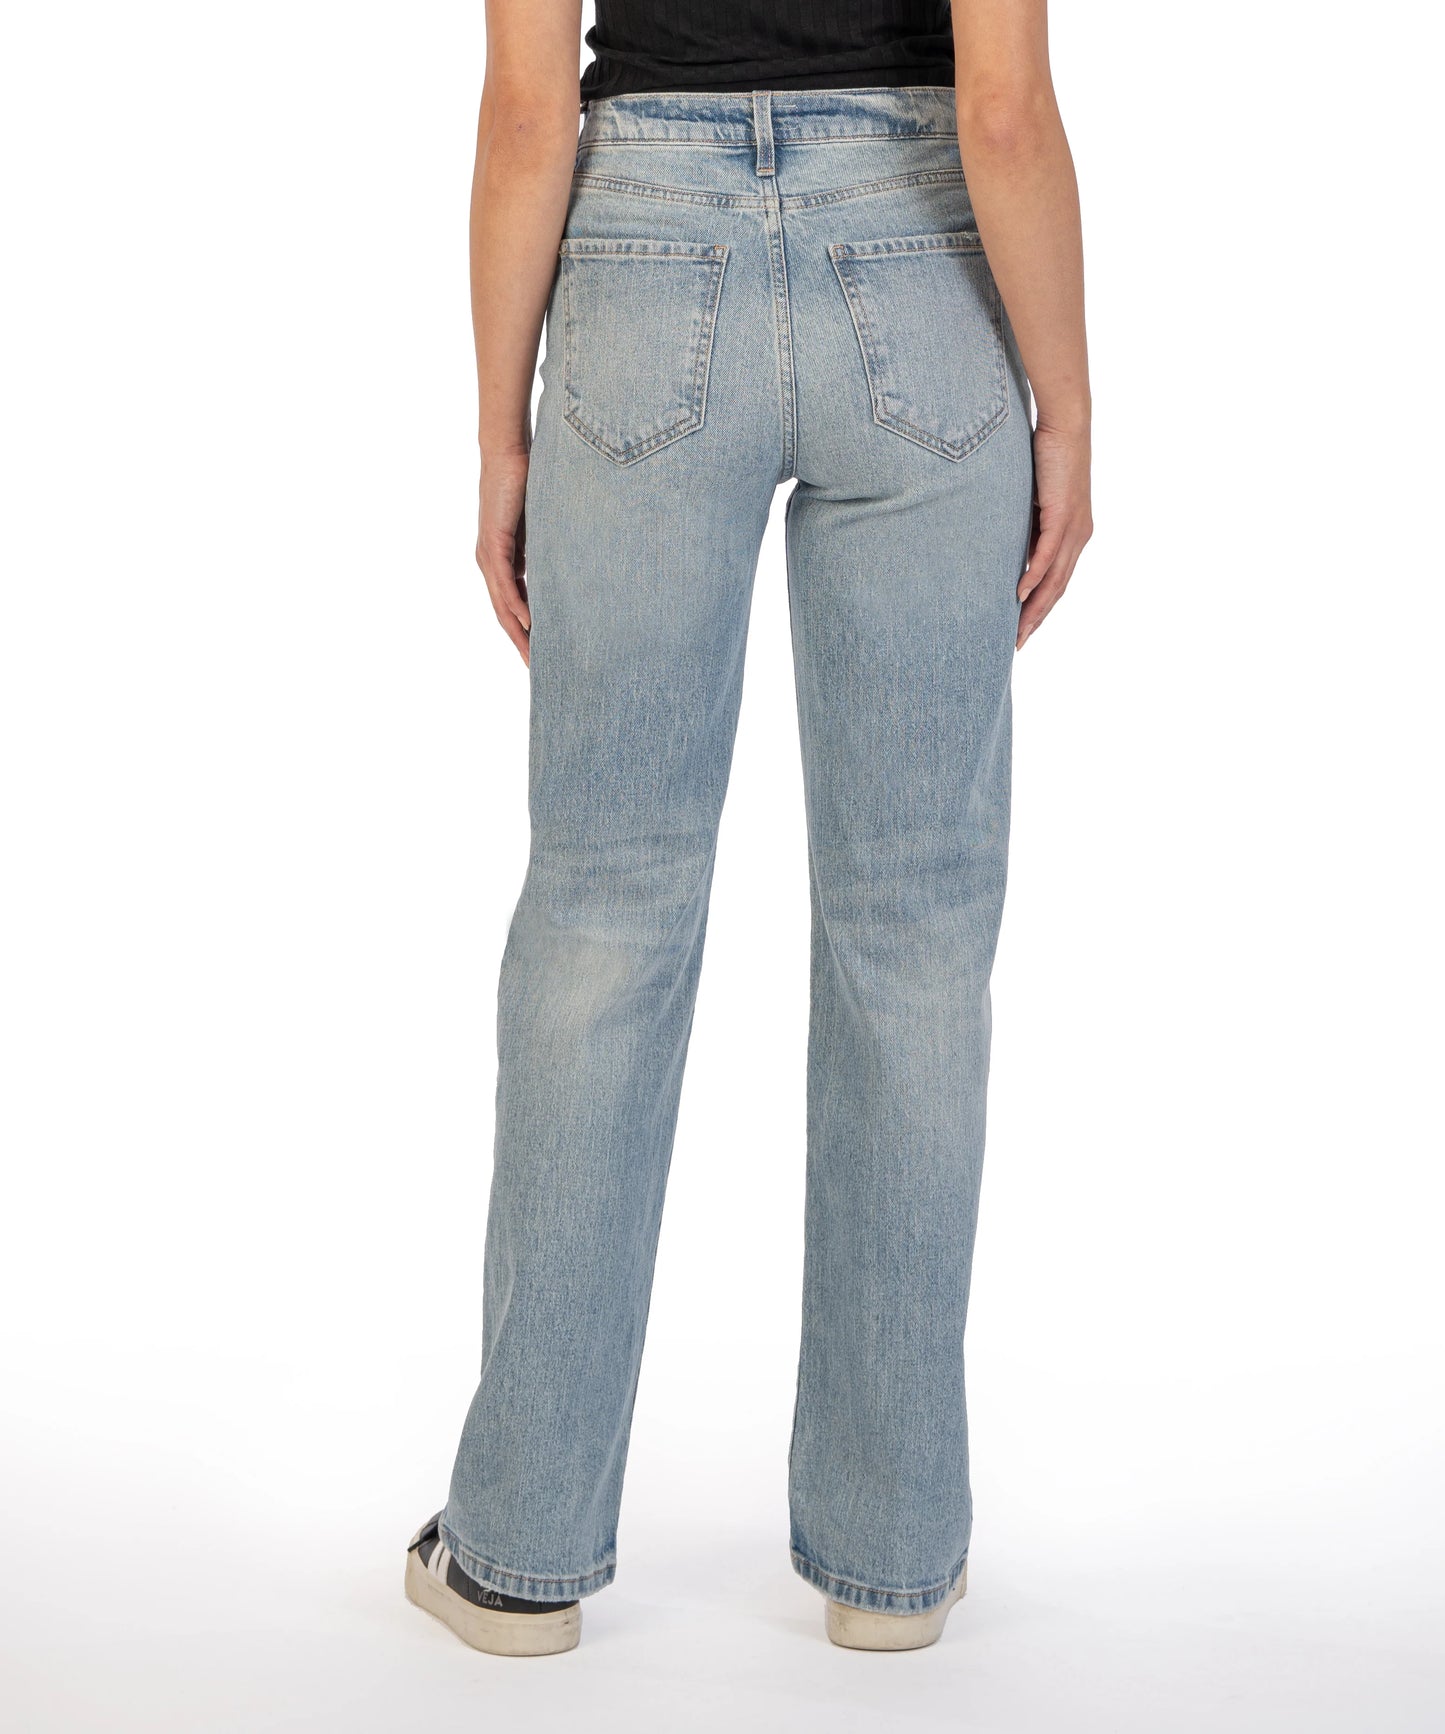 Kut from the Kloth Miller High Rise Wide Leg Candescent Jeans